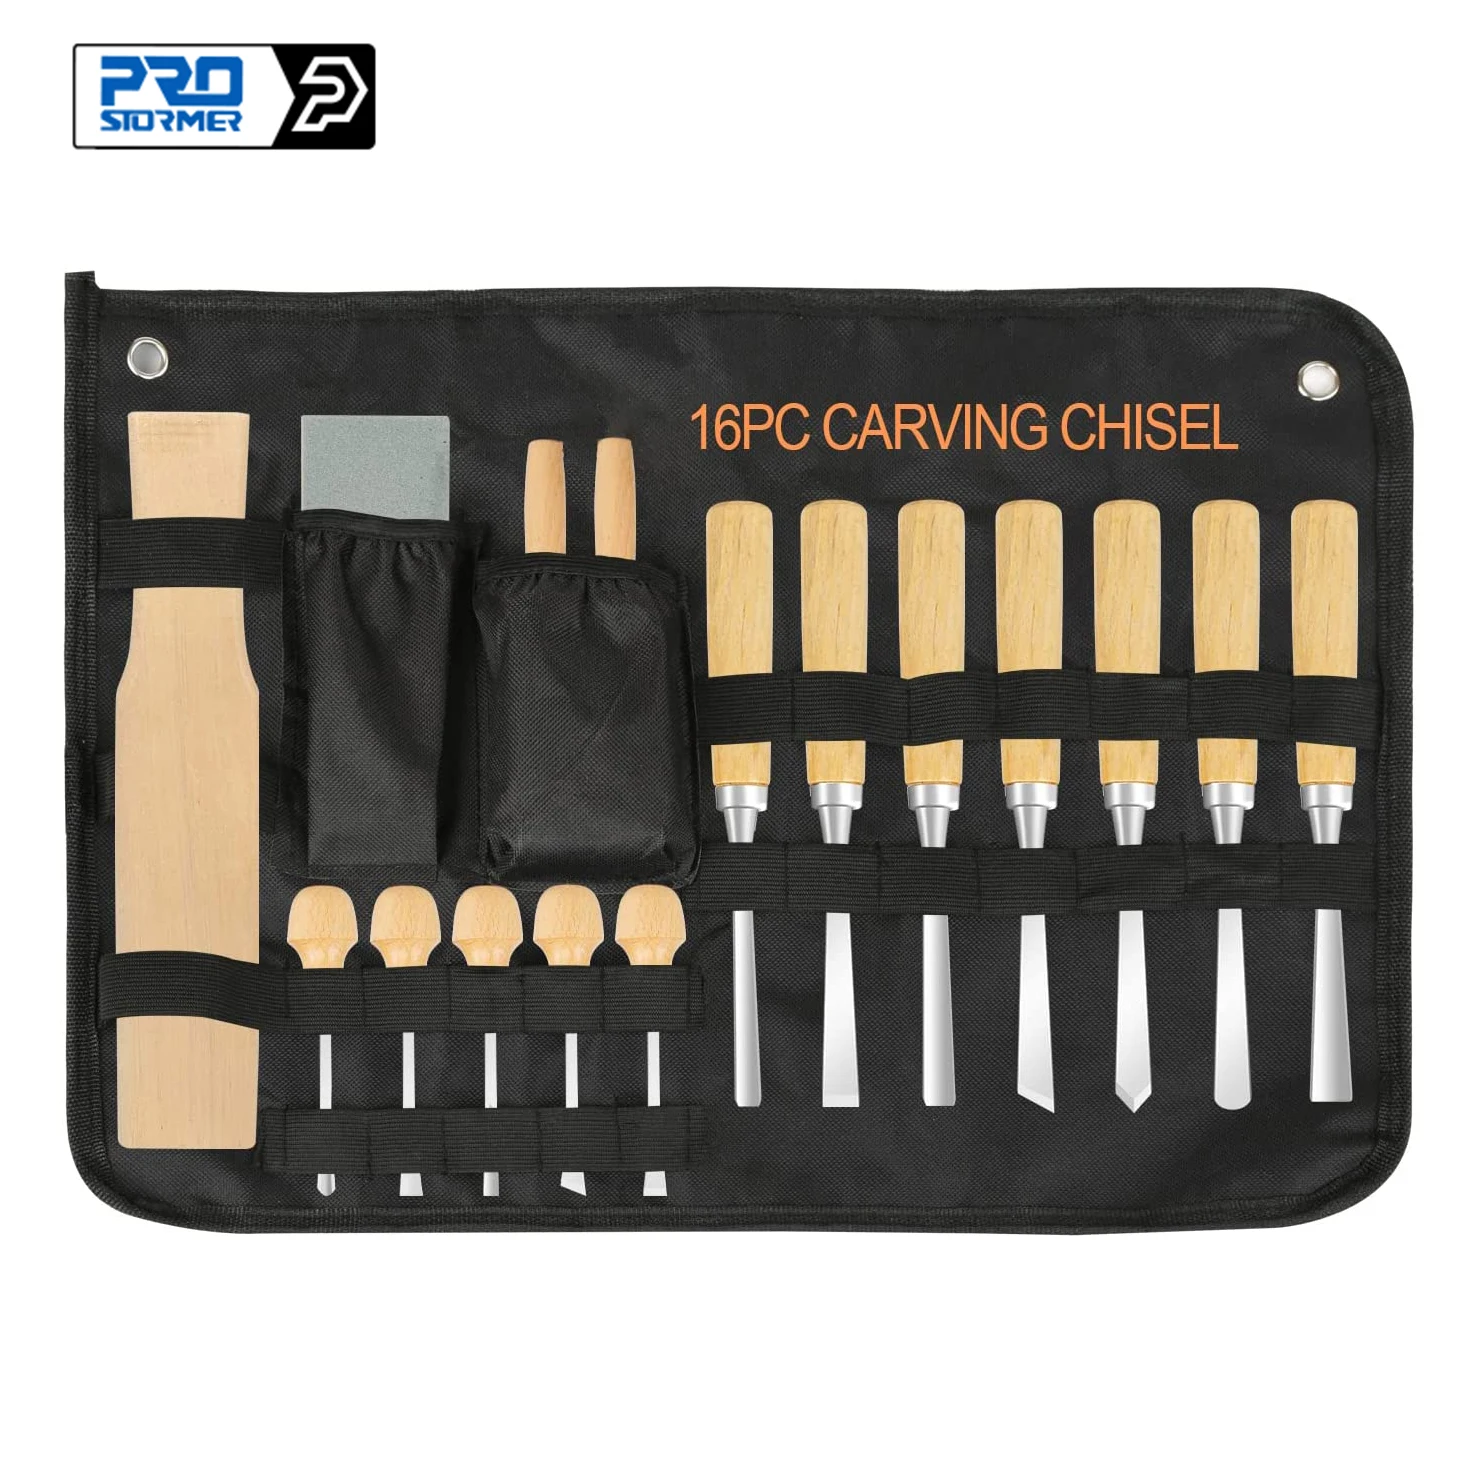 16PCS Wood Chisel Sets Woodworking Professional Wood Carving Tools with Wood Knives Carving Tools Sharpening Stone PROSTORMER